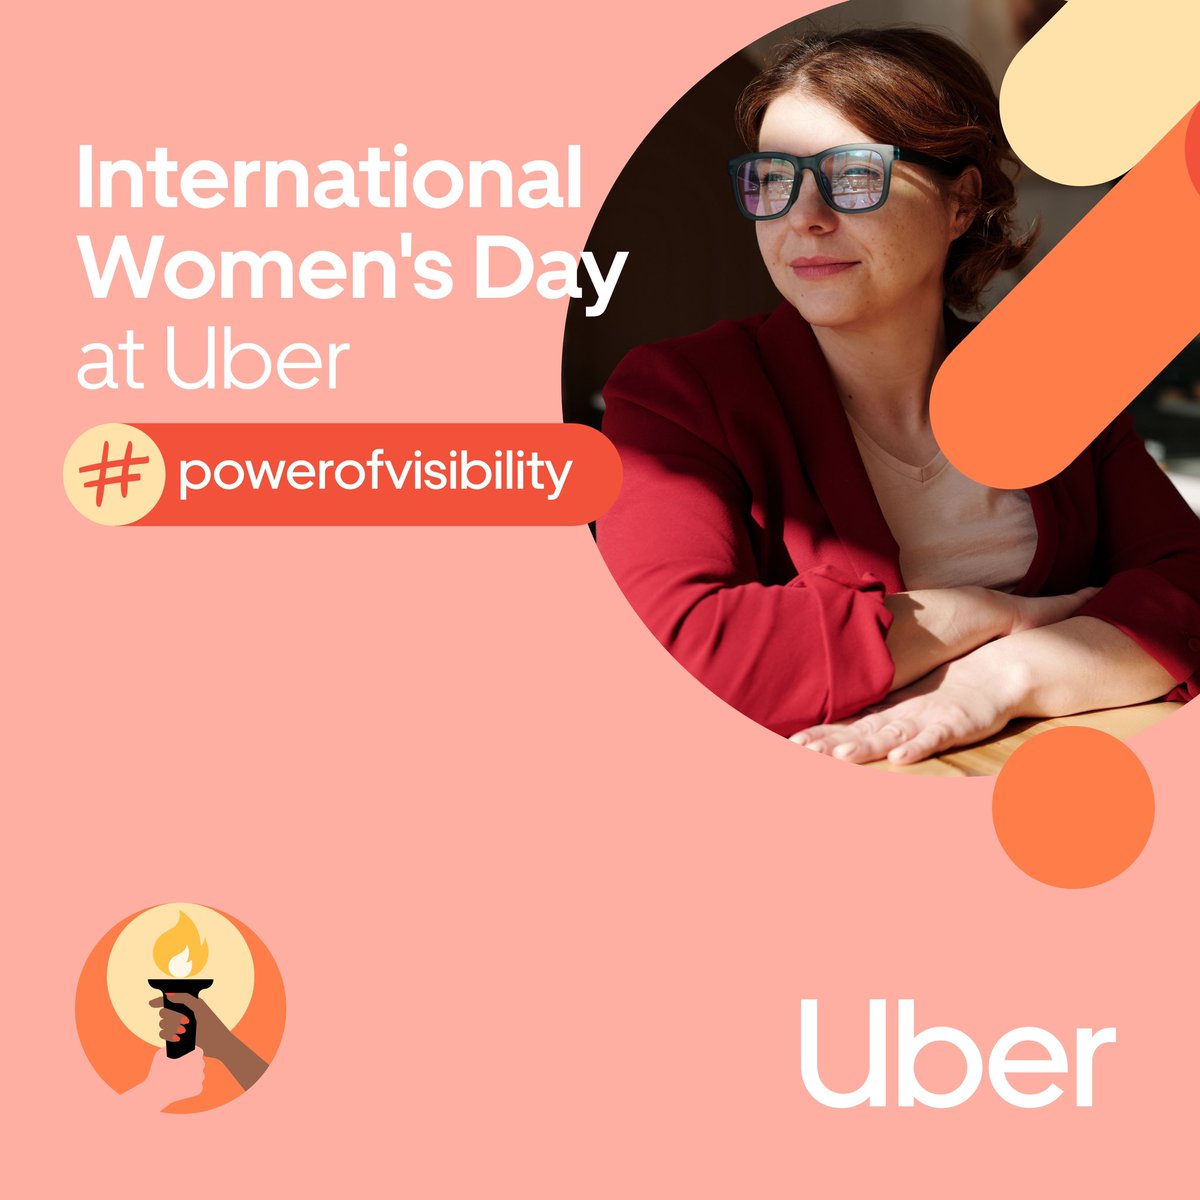 Recognizing the contribution of women and girls around the world, who are Making Moves and Moving Culture. We see you. #PowerOfVisibility #IWD2022 #WomensHistoryMonth